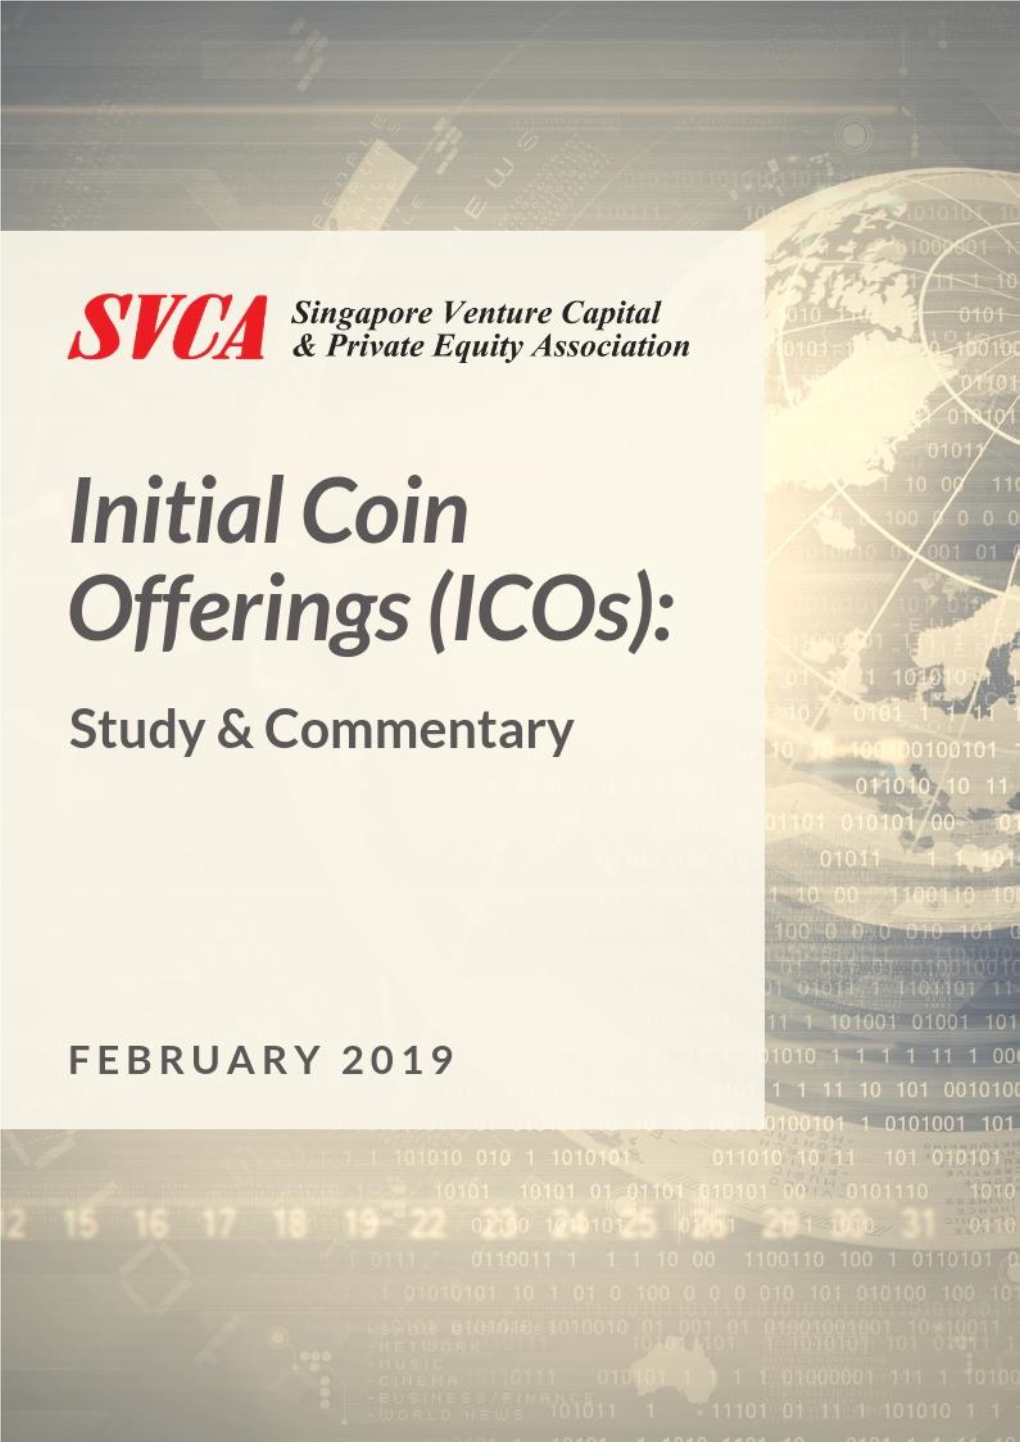 Initial Coin Offerings (Icos) Overview and Trends